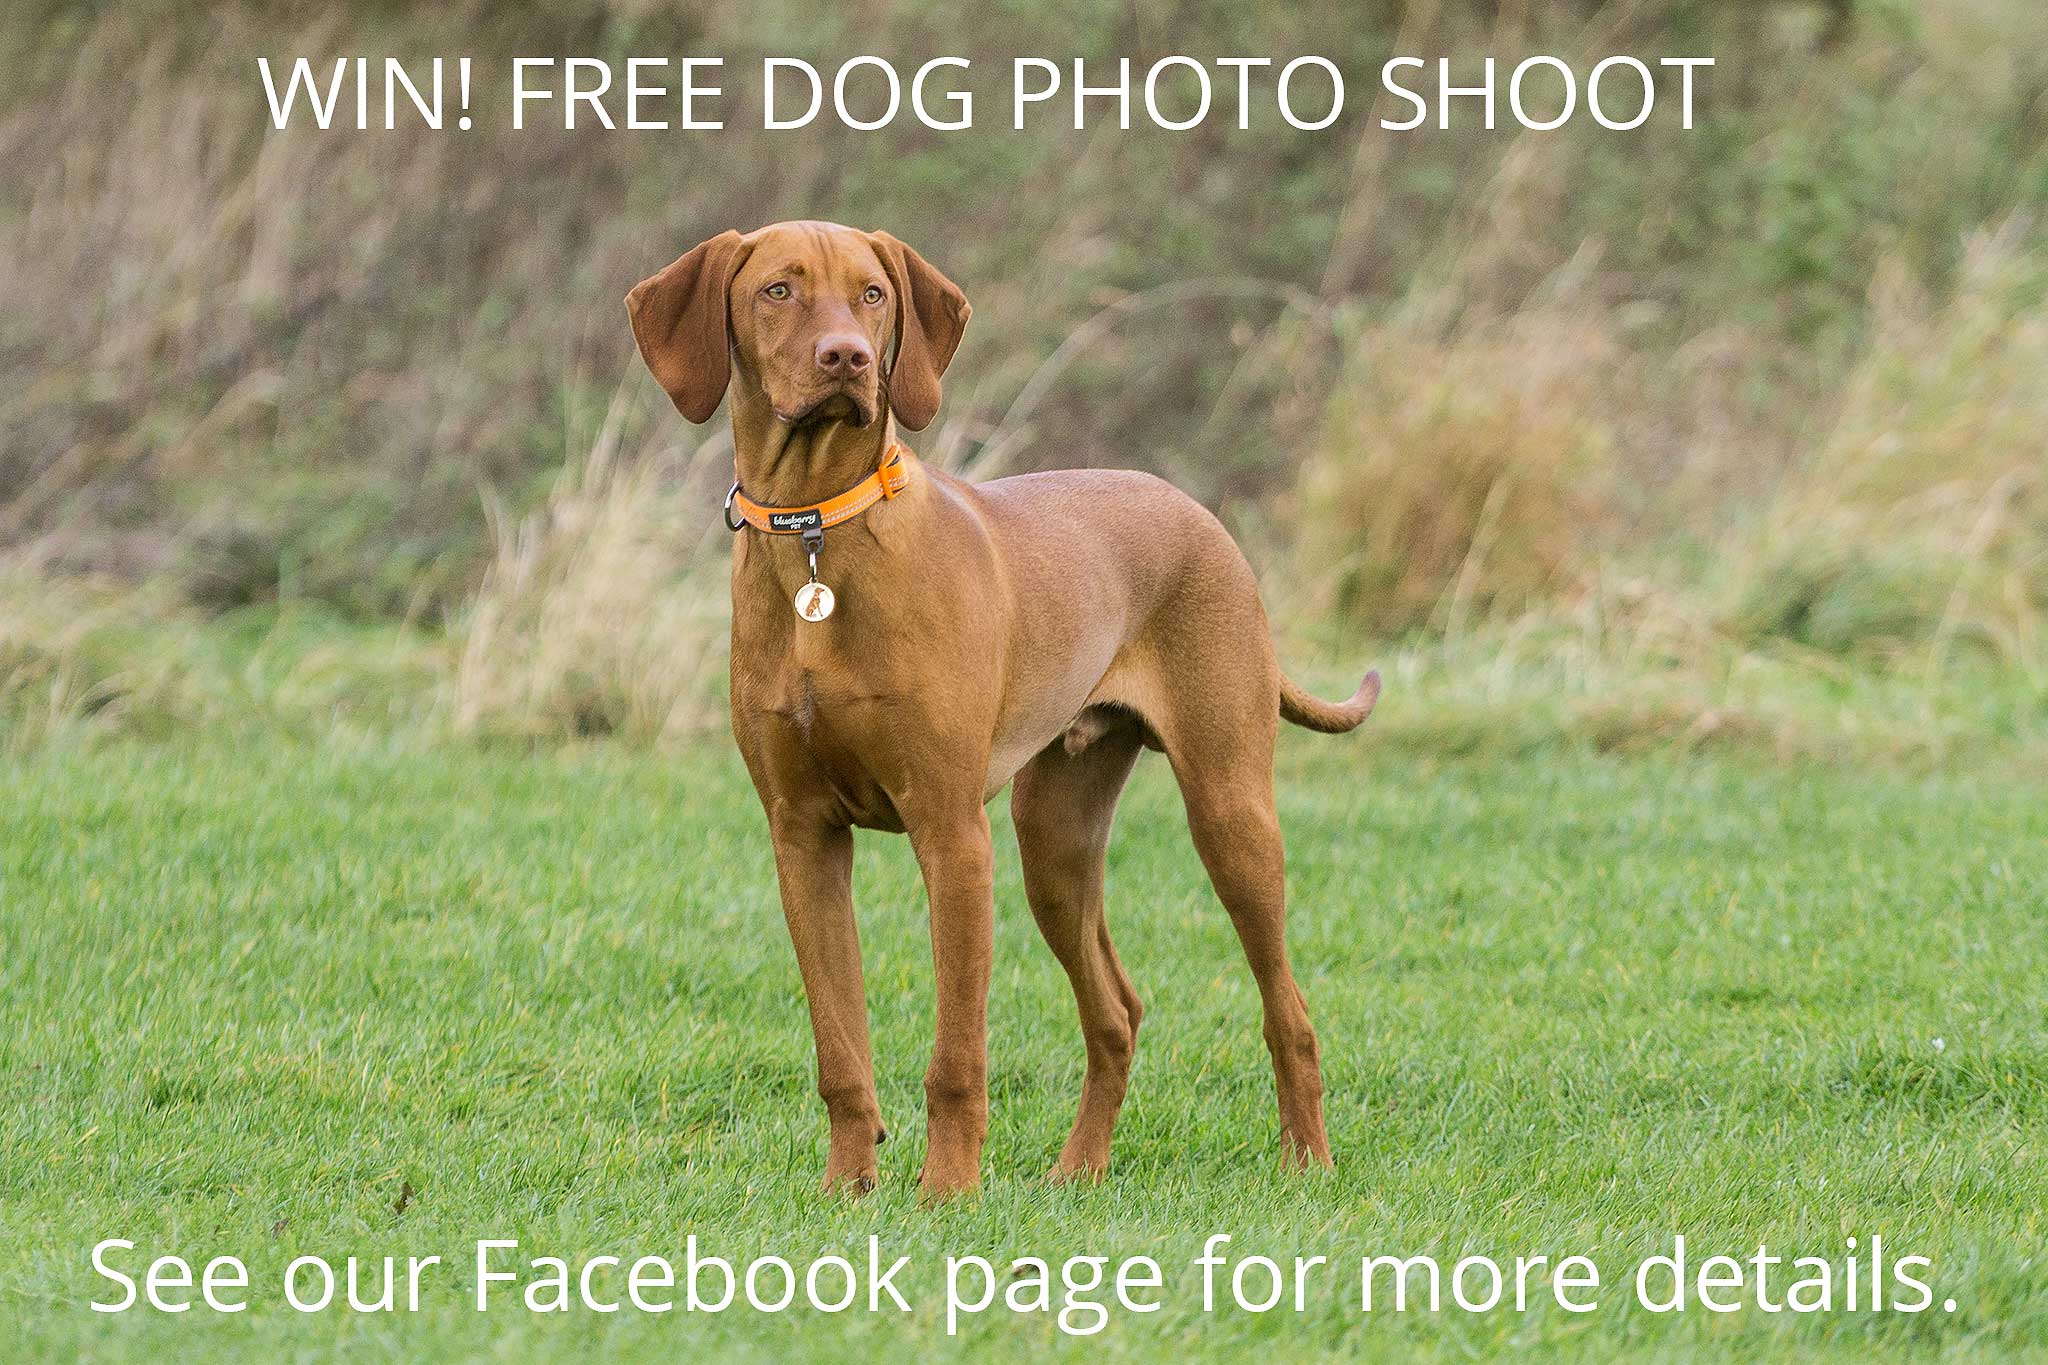 Dog Photo Shoot Competition